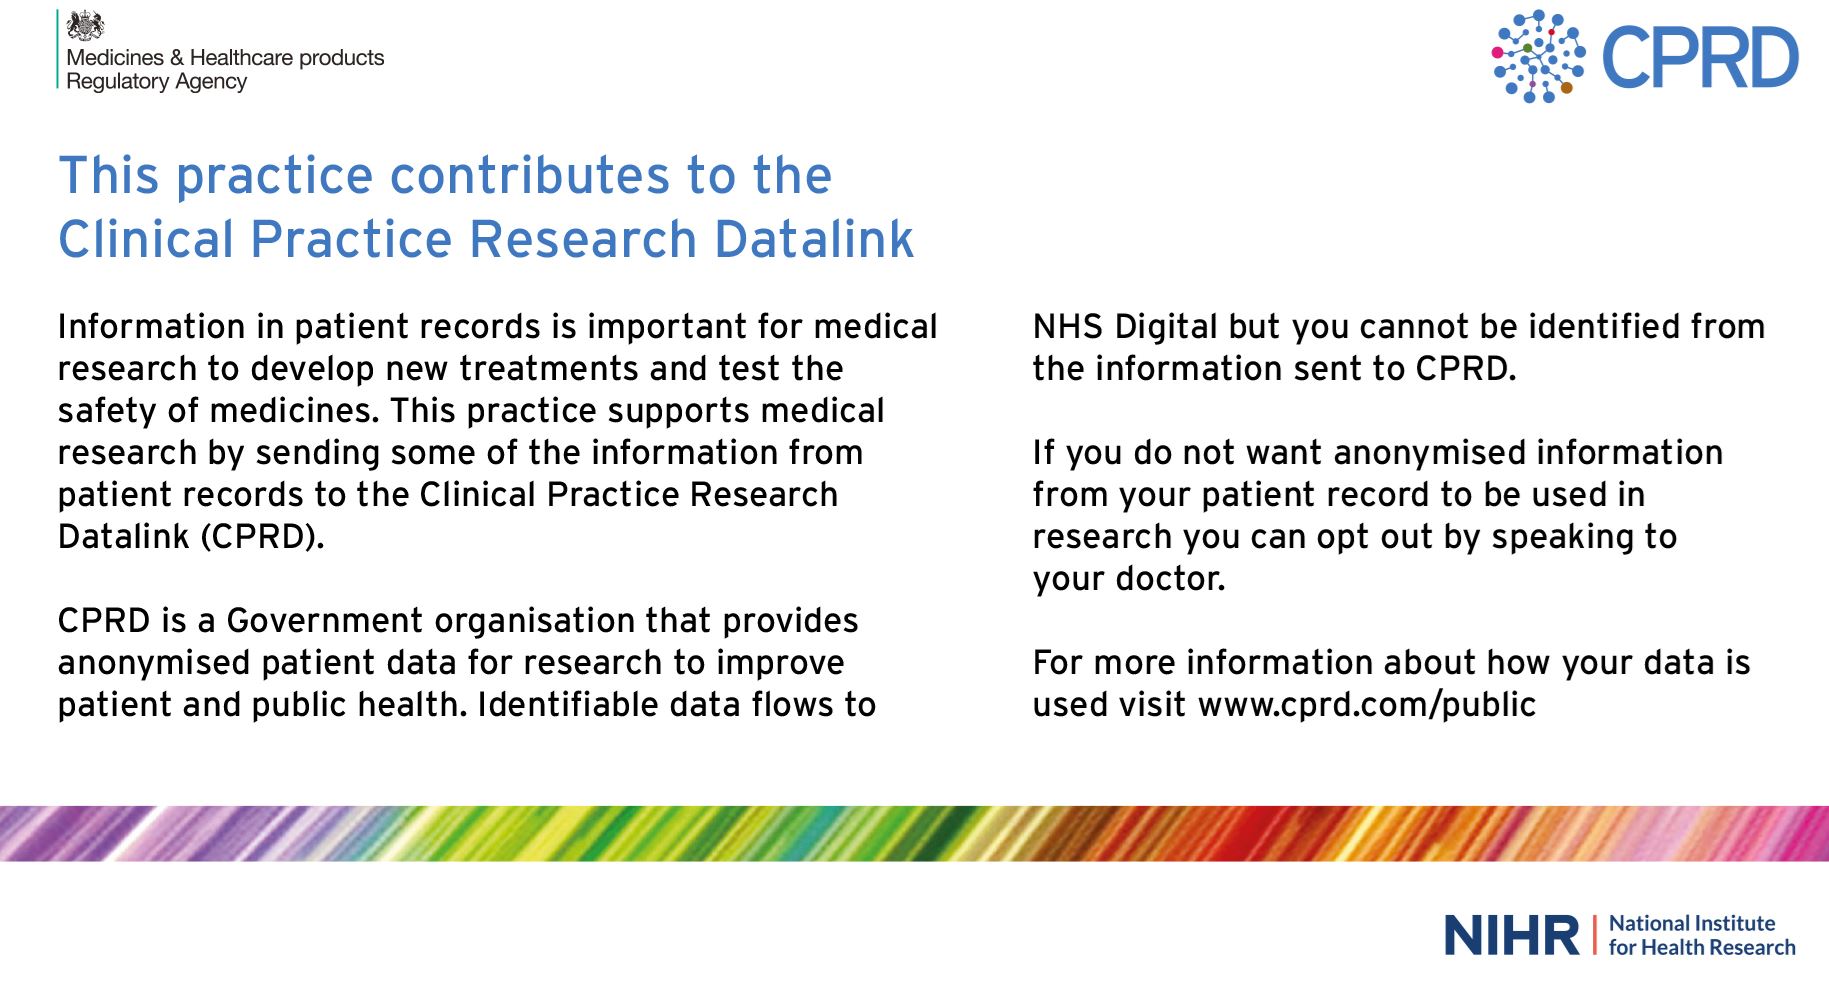 Clinical Practice Research Datalink (CPRD)